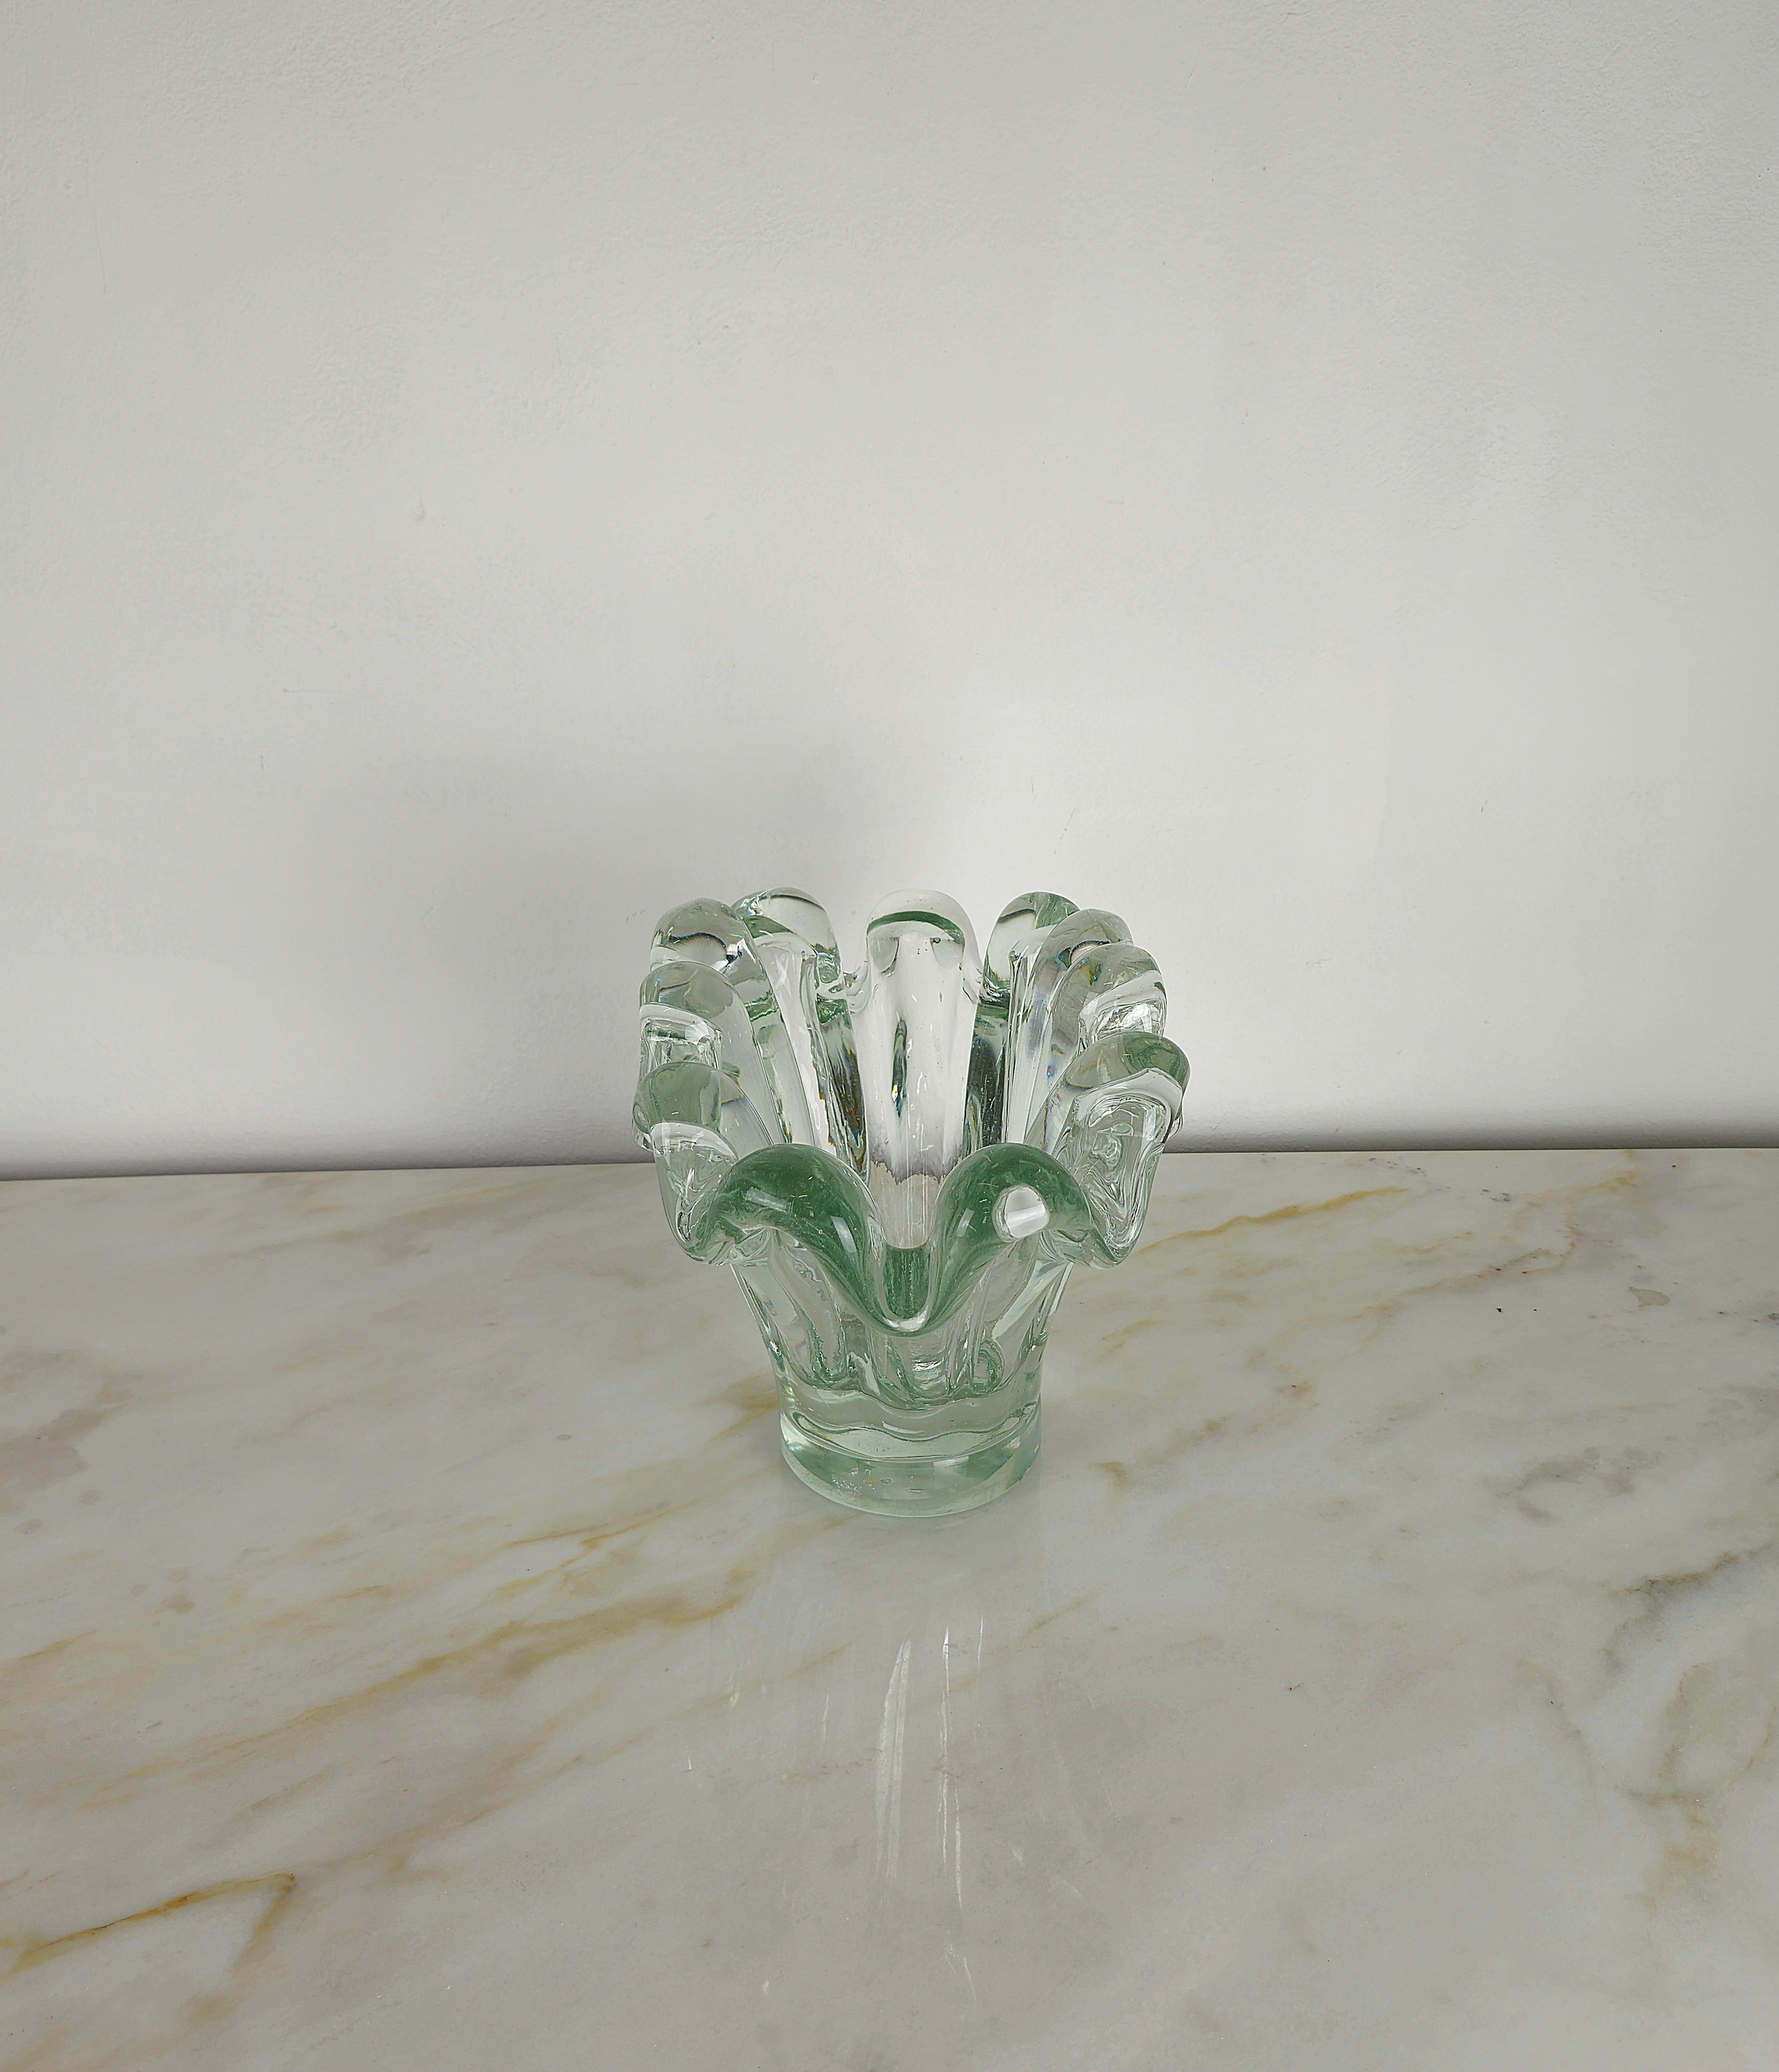 Italian Vase Decorative Object Transparent Murano Glass Large Midcentury Italy 1960s For Sale